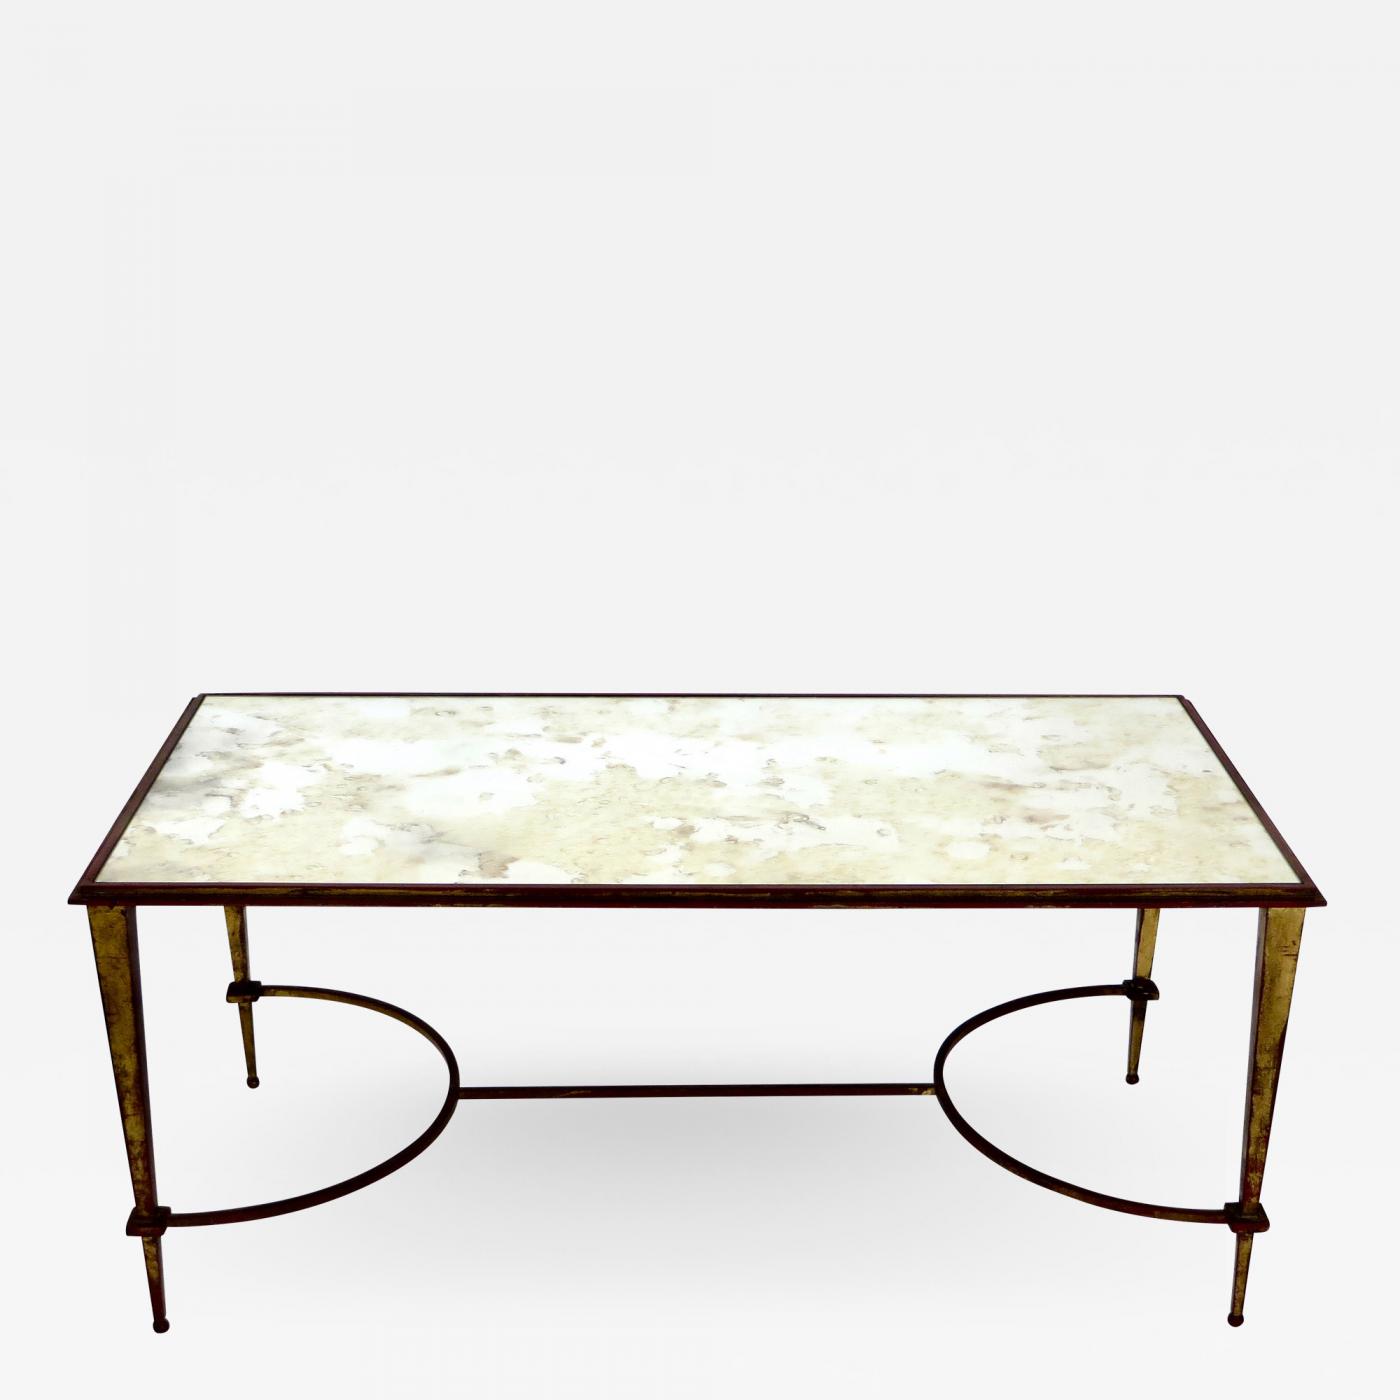 Maison Ramsay Maison Ramsay Coffee Table With Gilded Mirrored Top Verre Eglomise